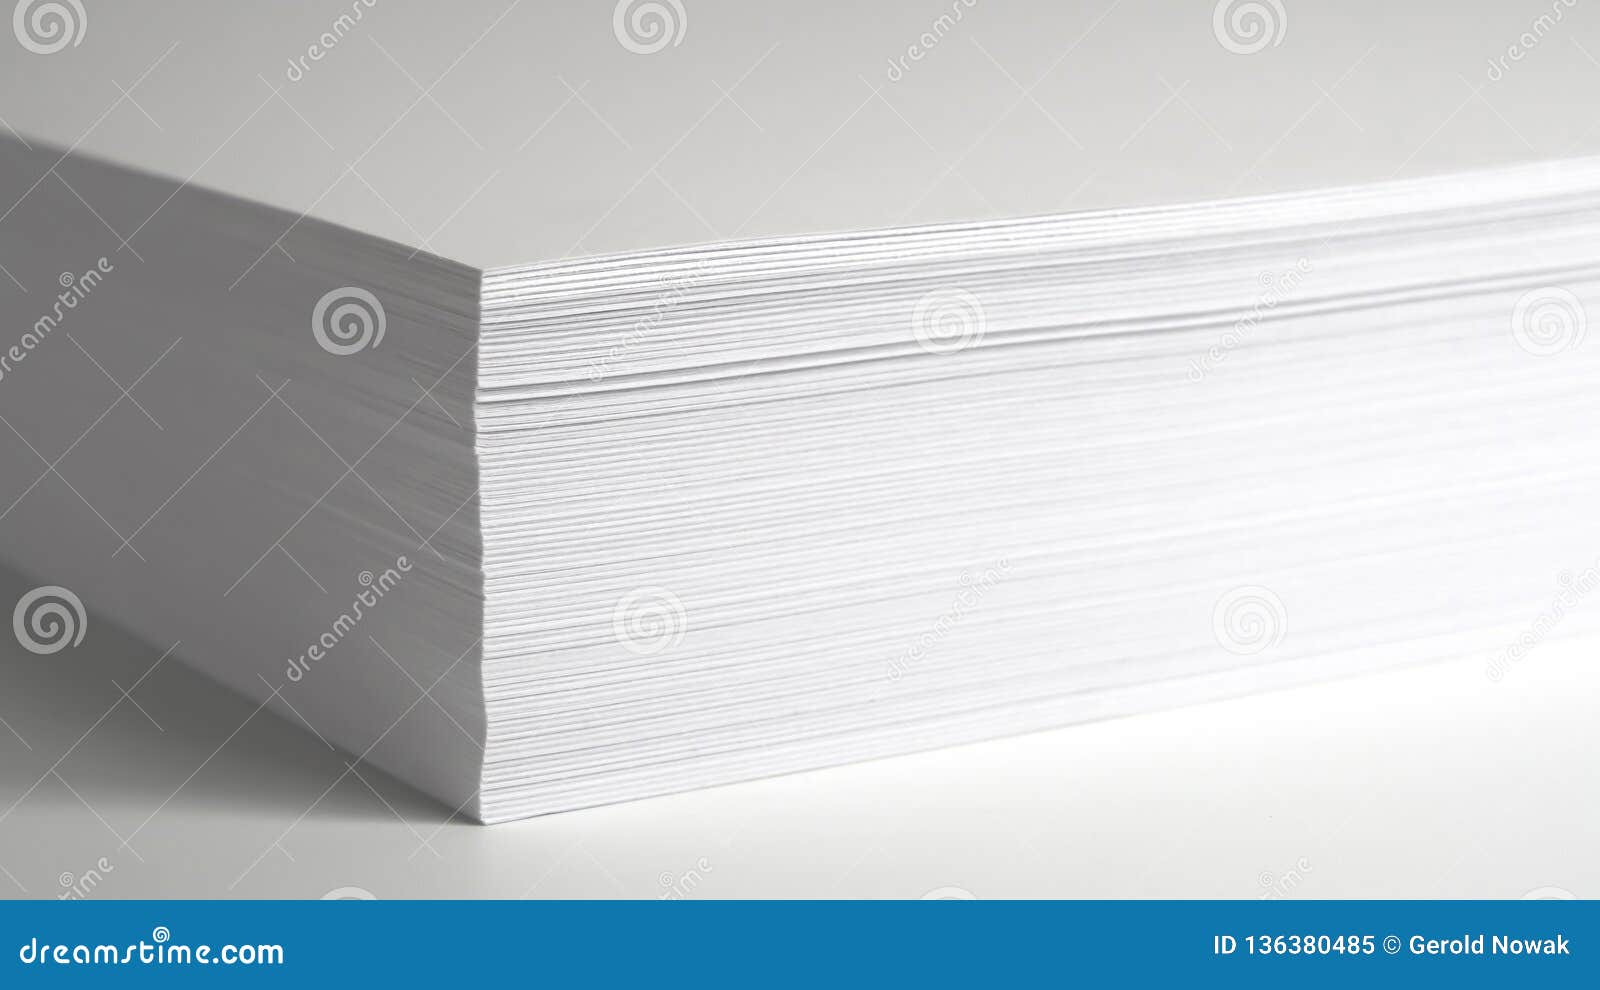 Stack of White Printer Paper Stock Image - Image of paper, edge